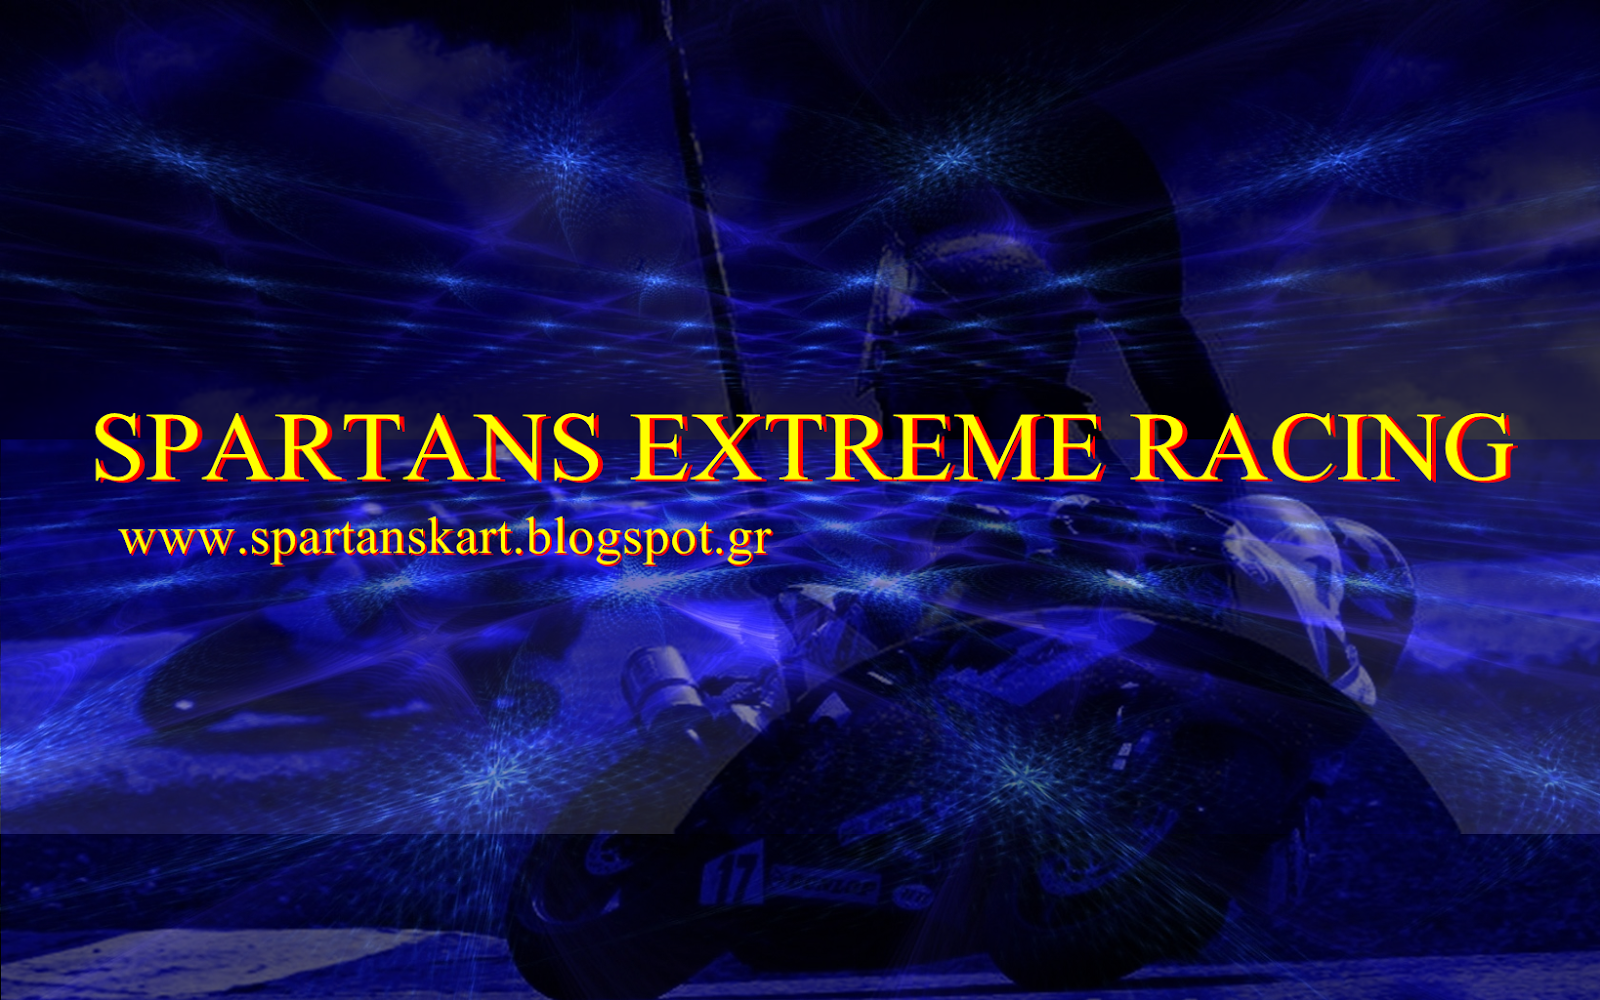 SPARTANS EXTREME RACING